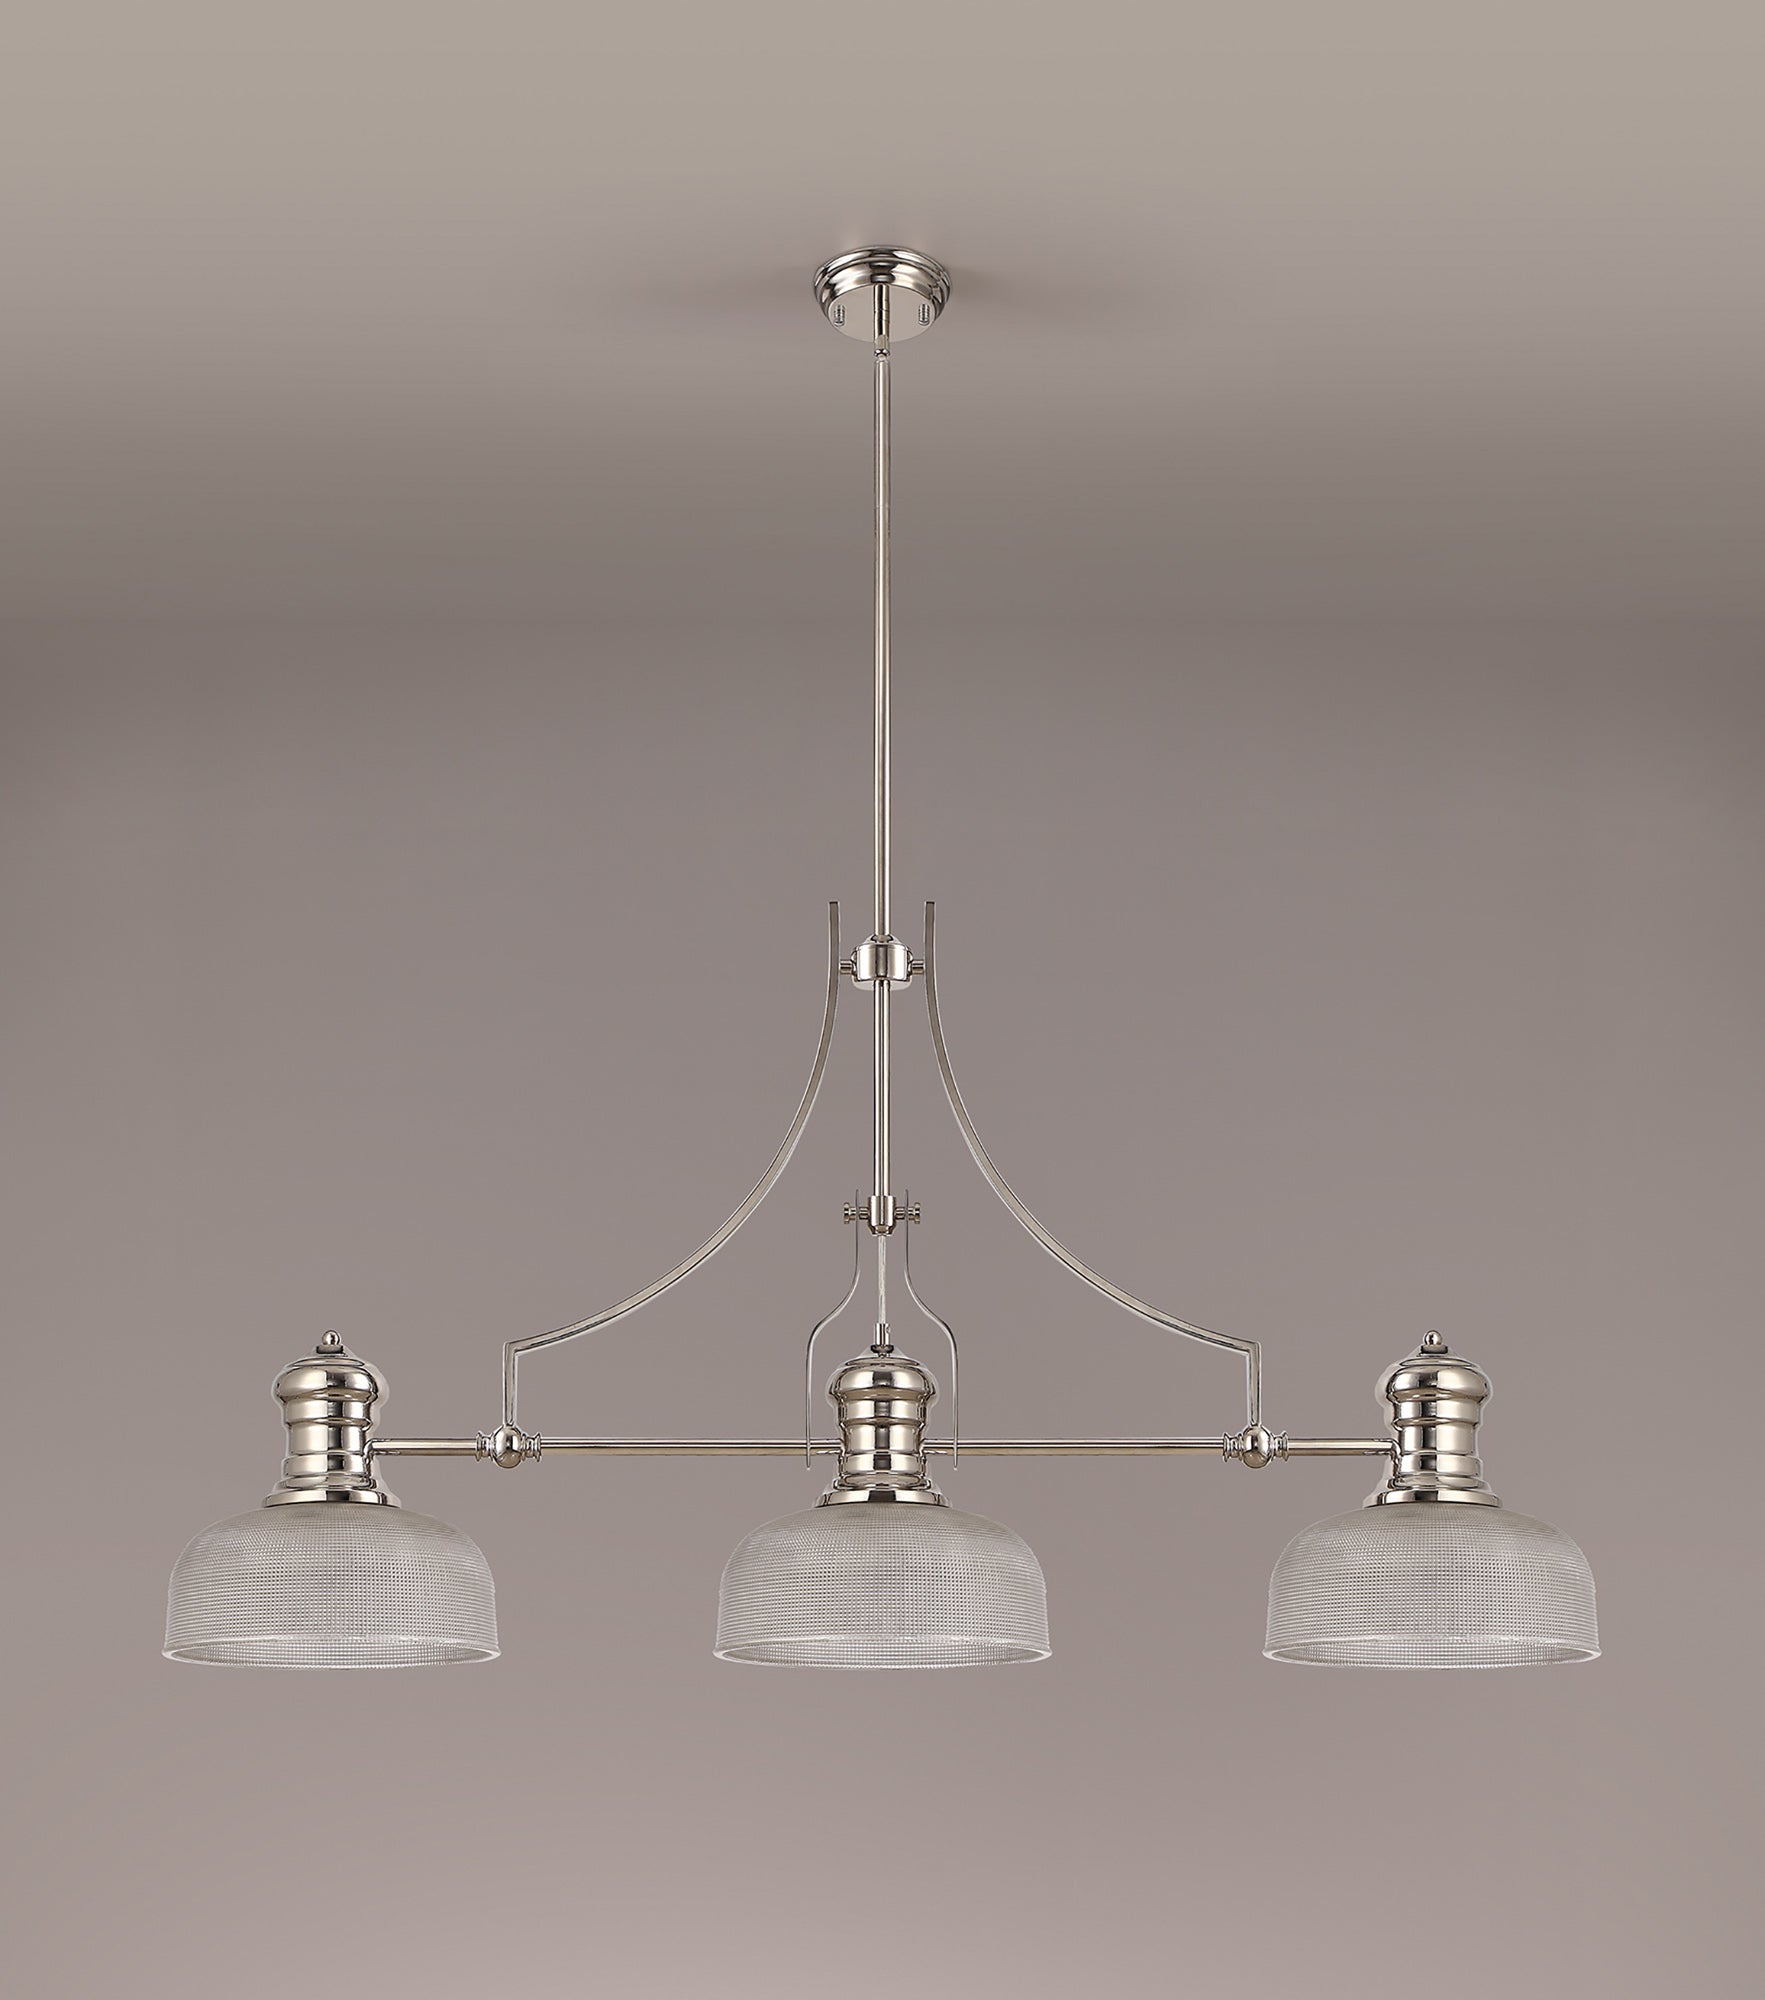 Docker 3 Light Linear Pendant E27 With 26.5cm Prismatic Glass Shade, Polished Nickel, Clear